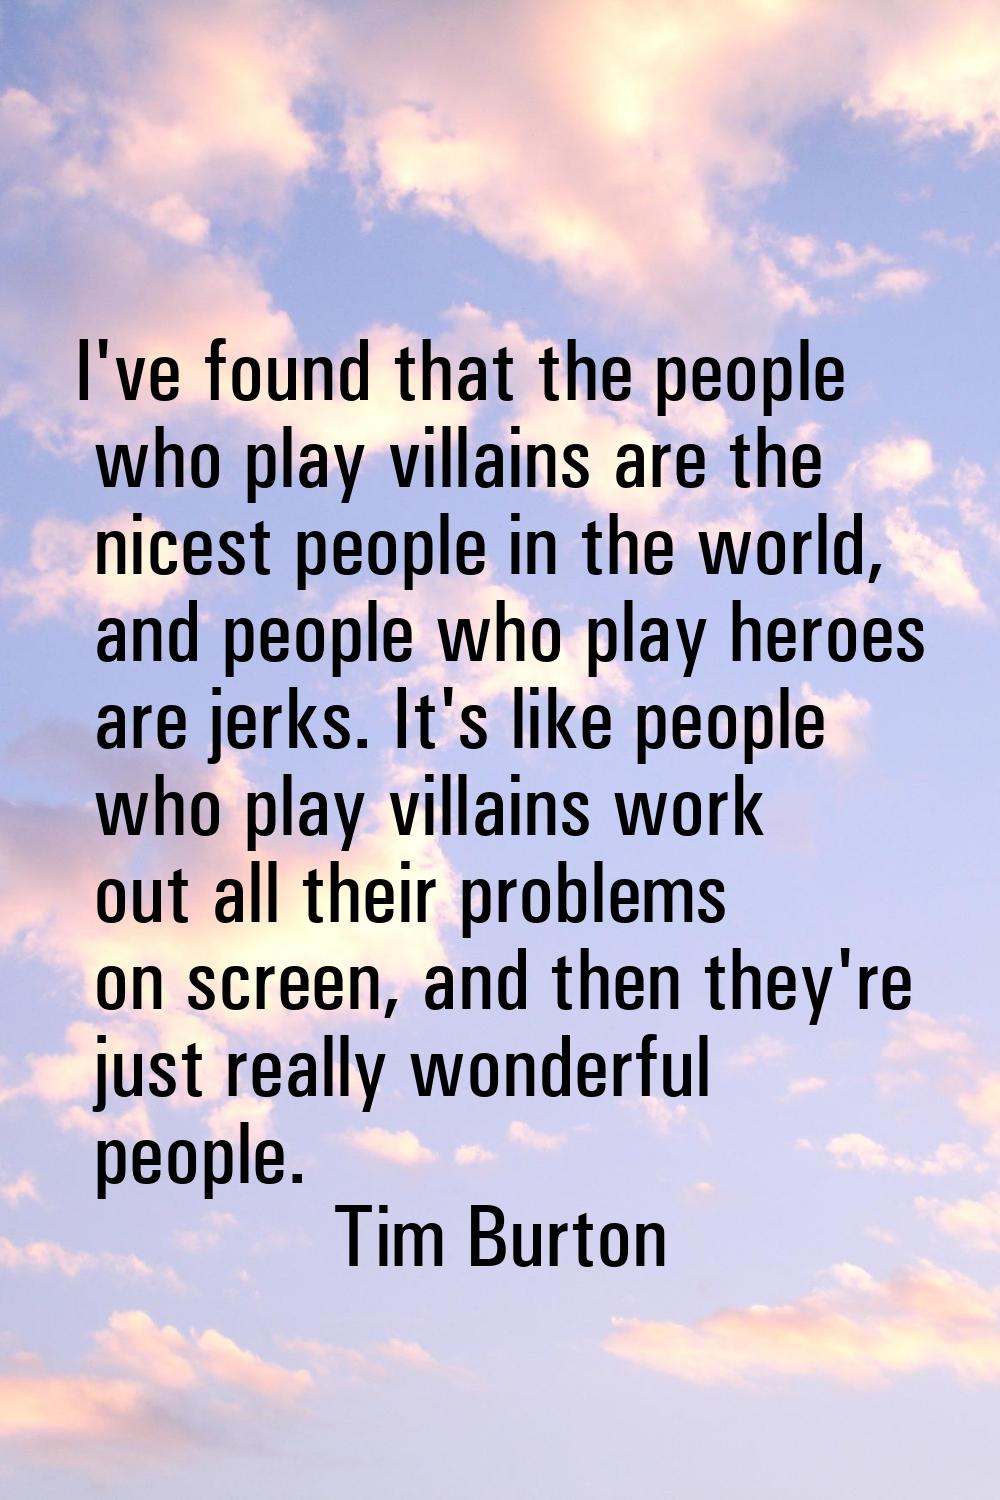 I've found that the people who play villains are the nicest people in the world, and people who pla